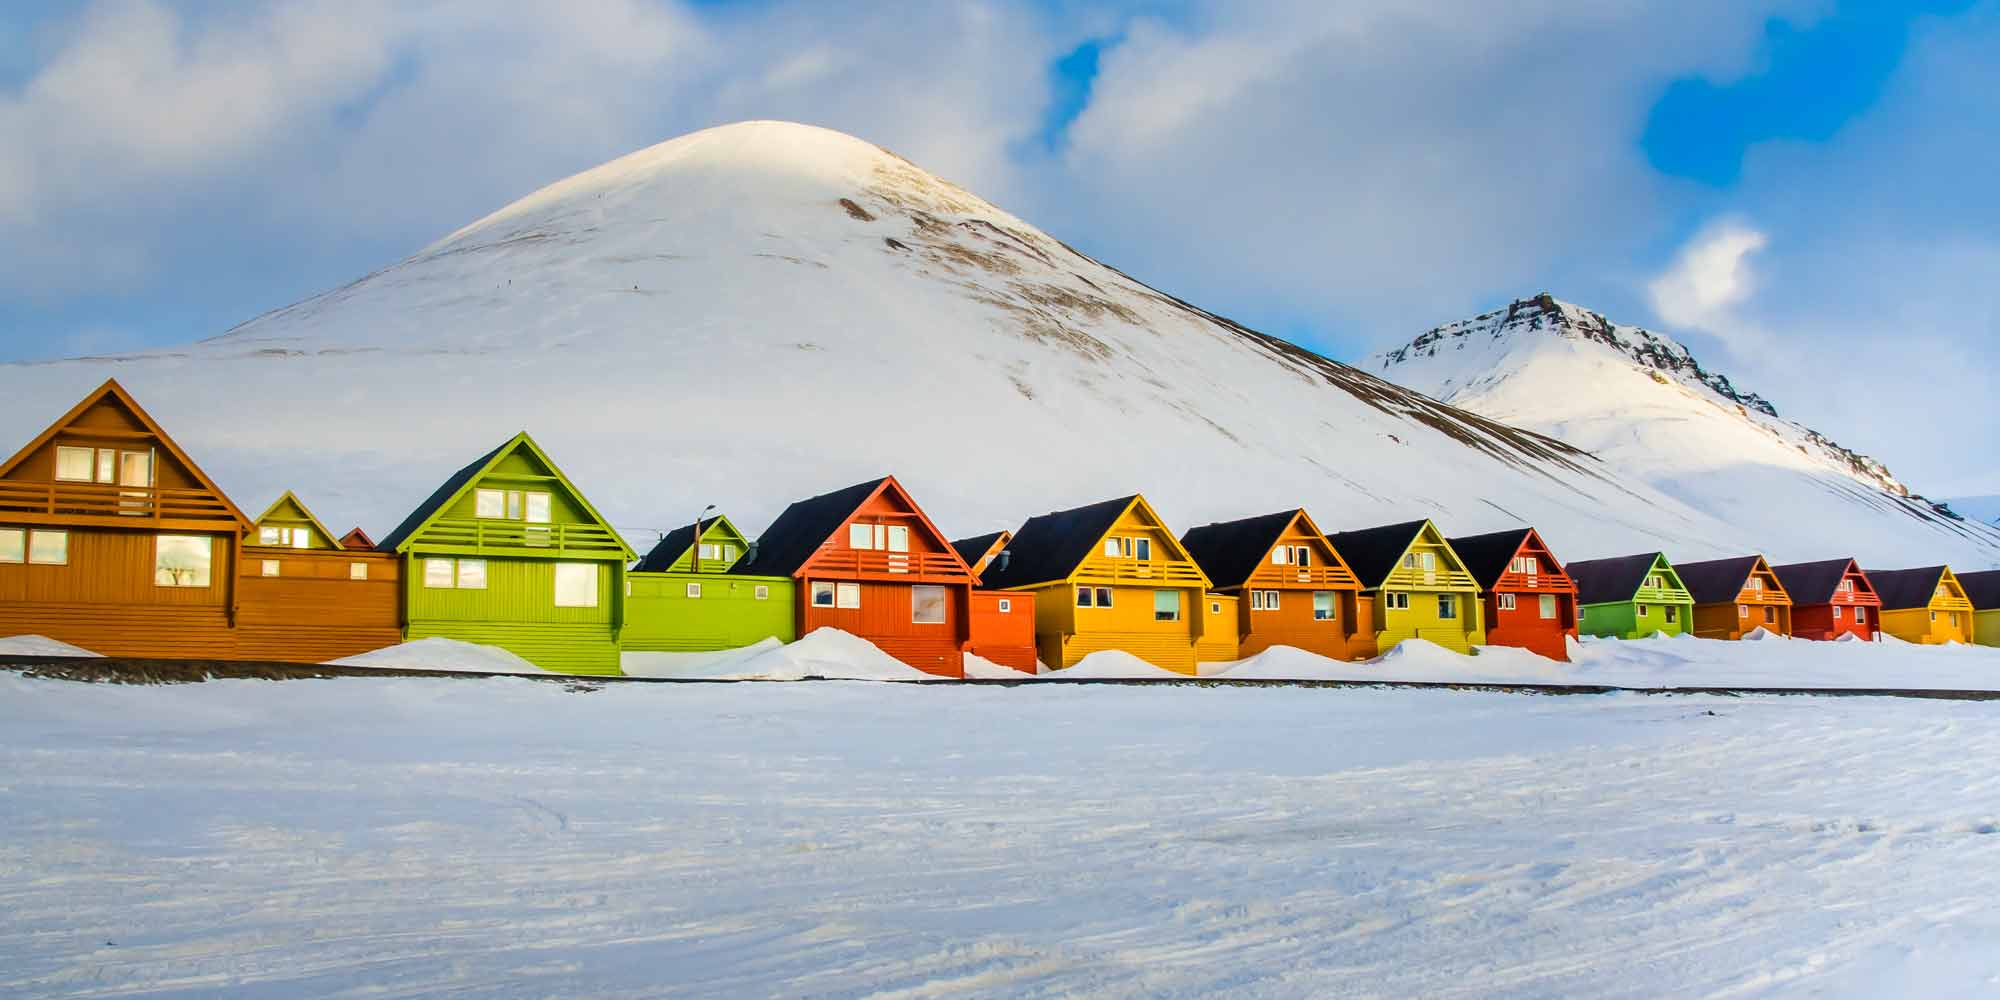 The colorful houses Longyearbyen